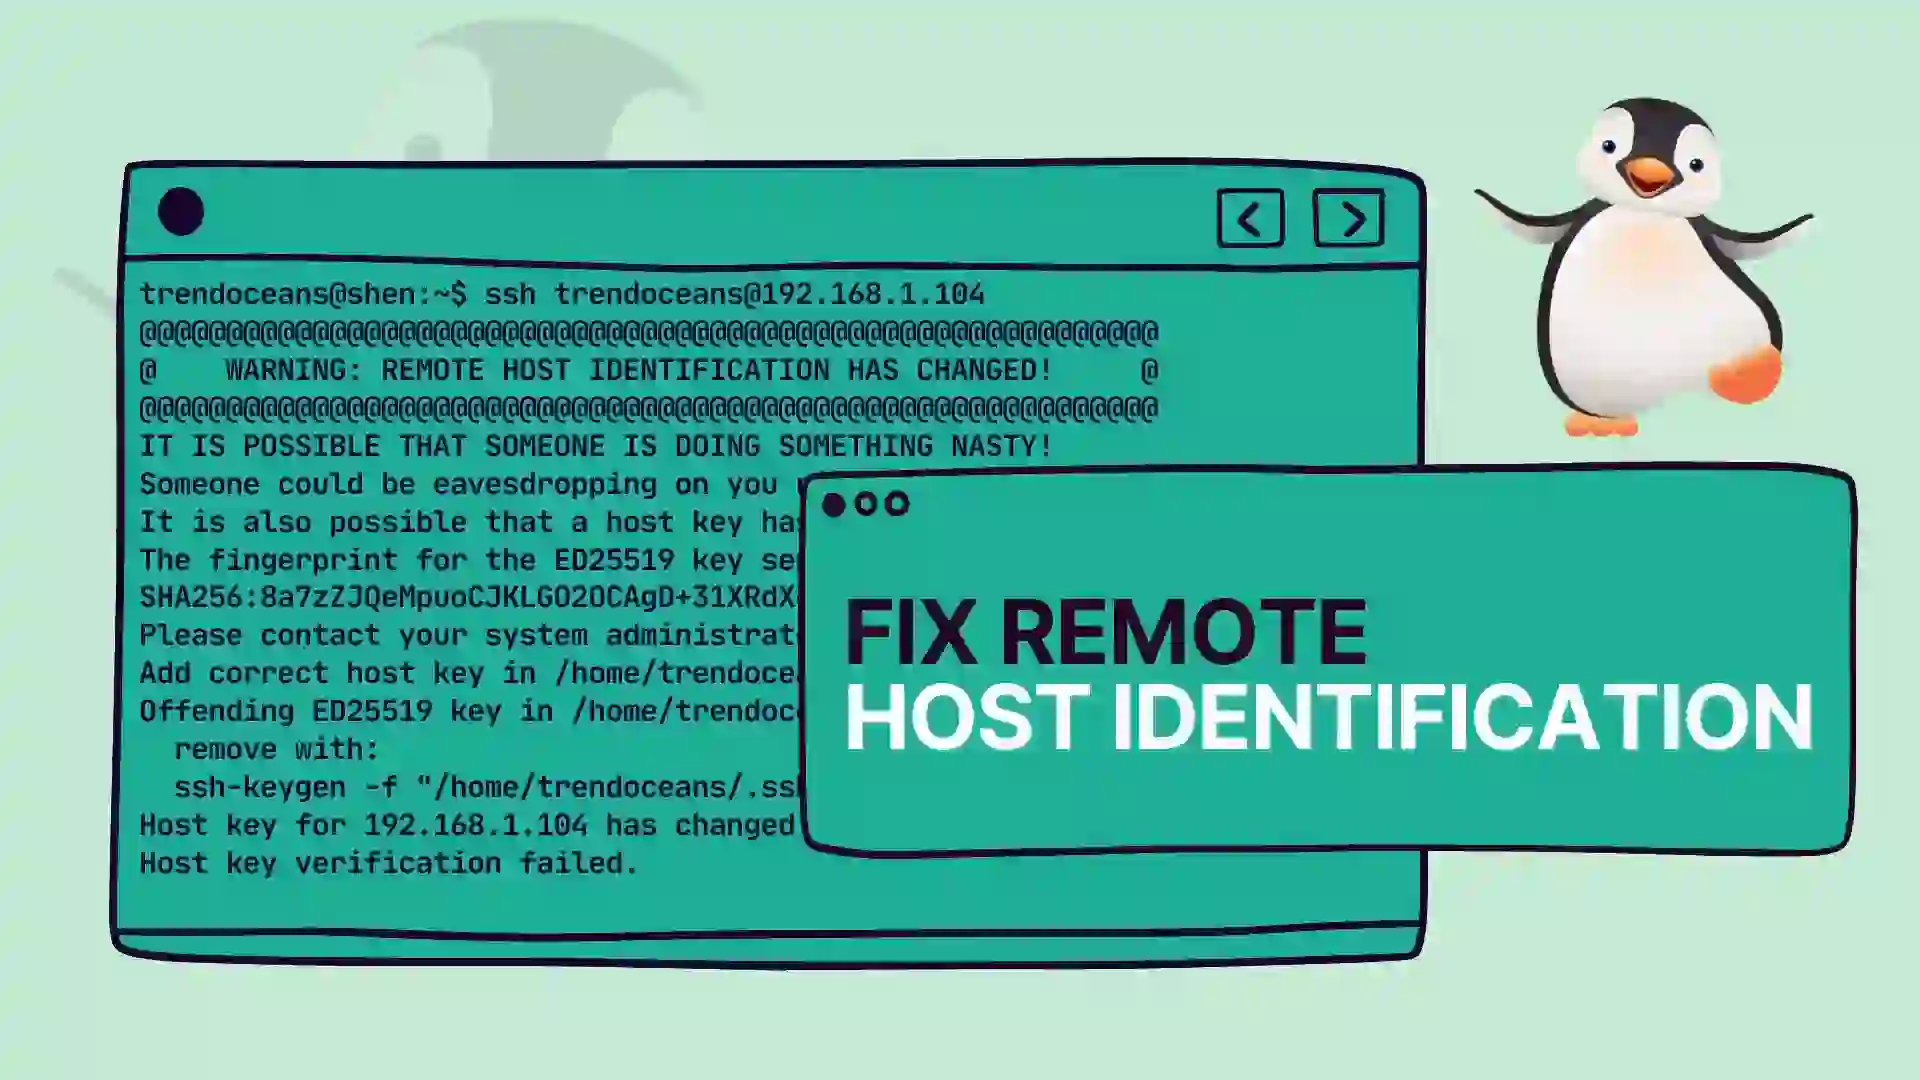 How To Fix Remote Host Identification Has Changed While Ssh - Trend Oceans